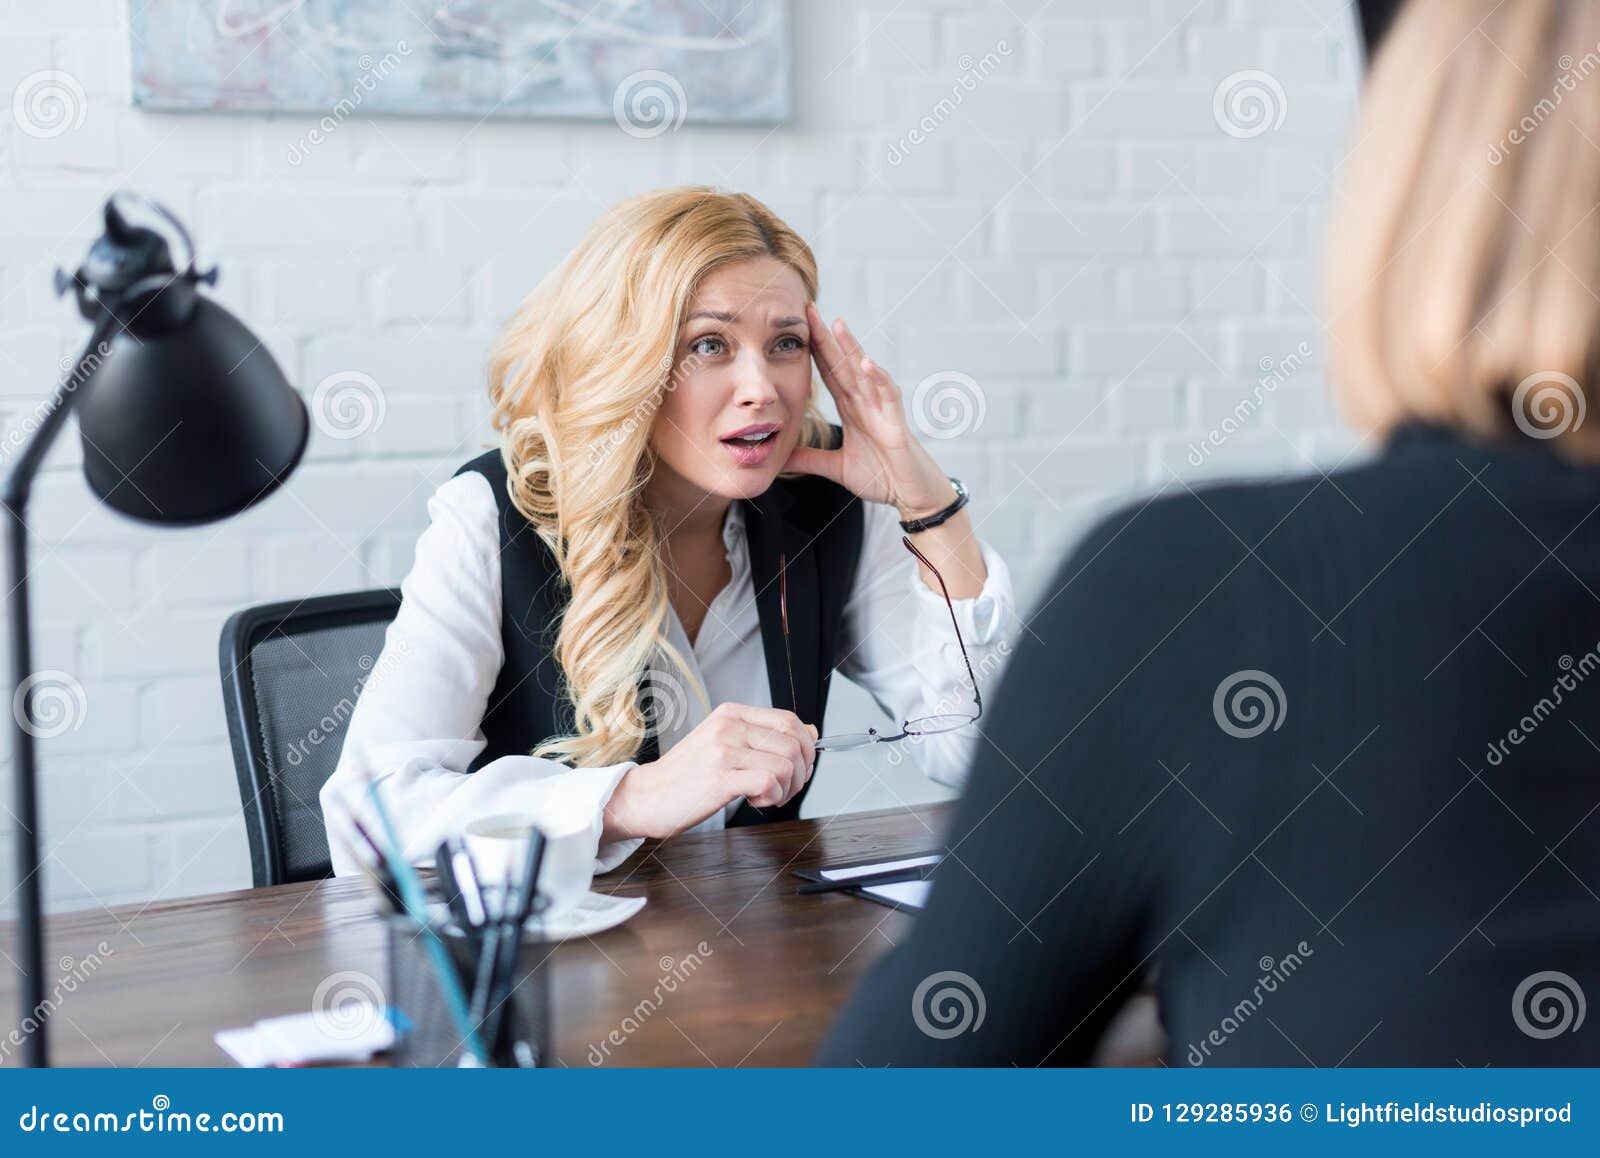 Irritated Businesswoman Looking At Coworker Stock Photo Image Of